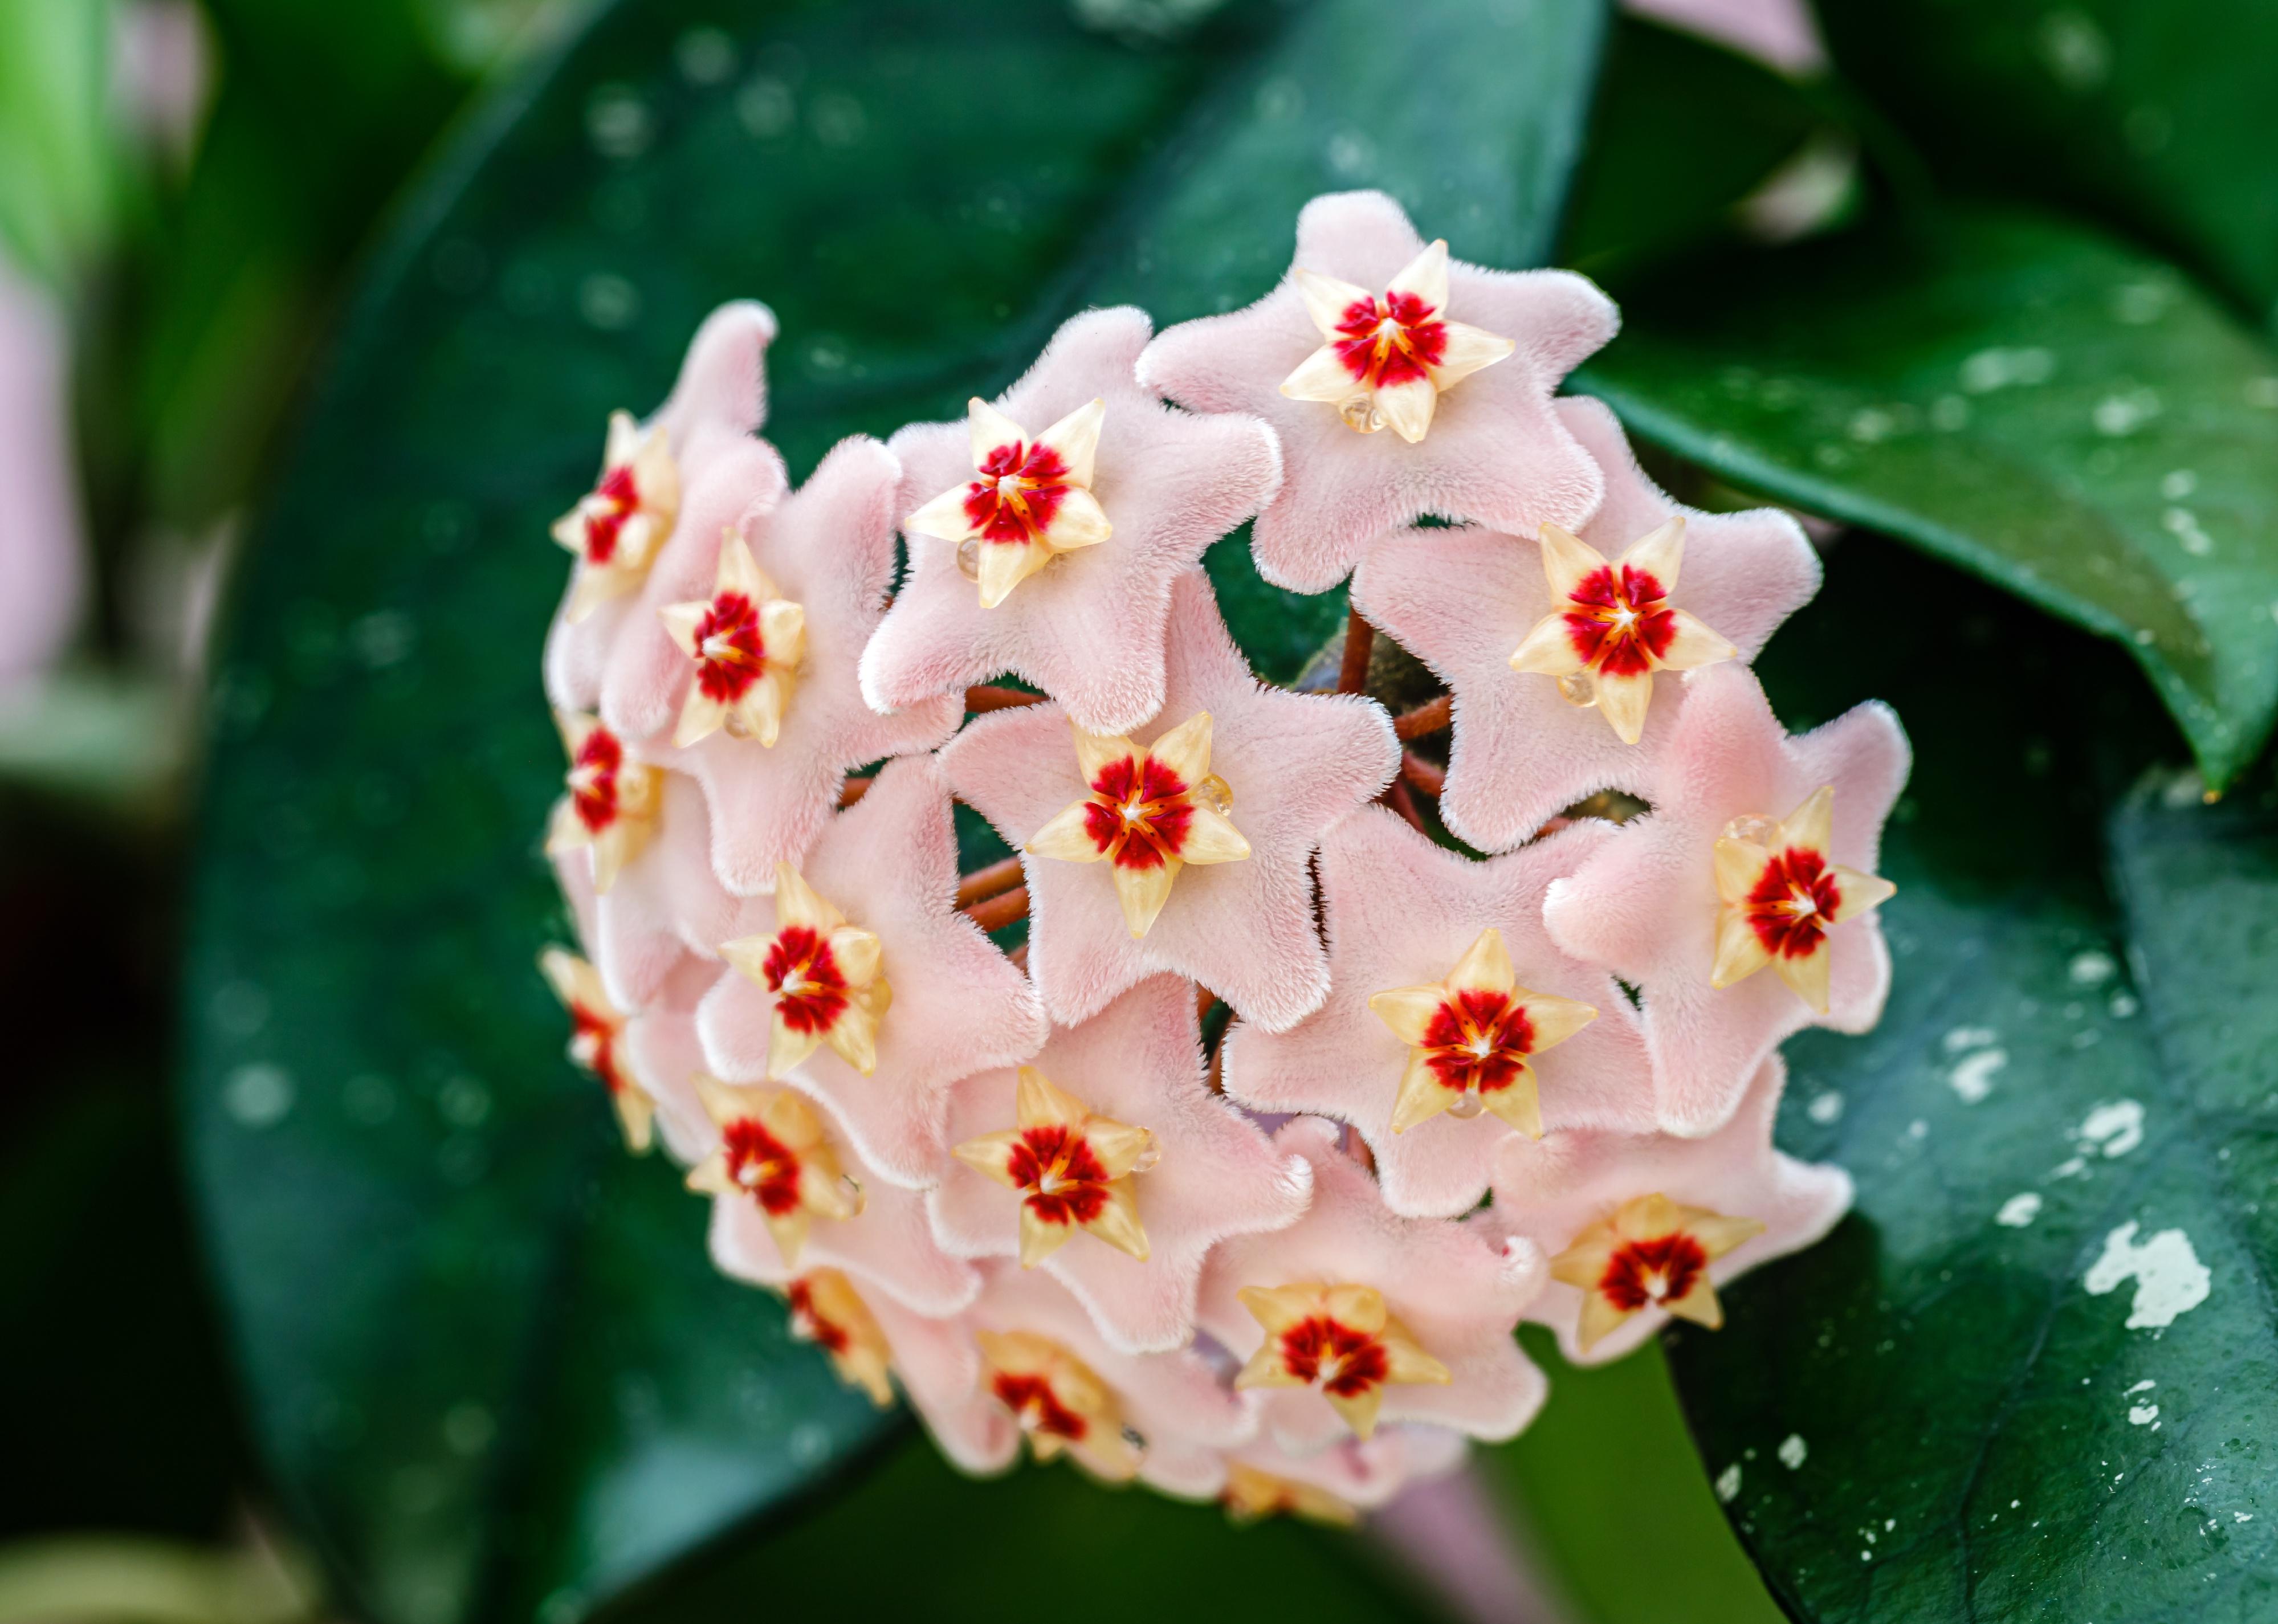 Pastel pink Hoya carnosa flowers and green leaves